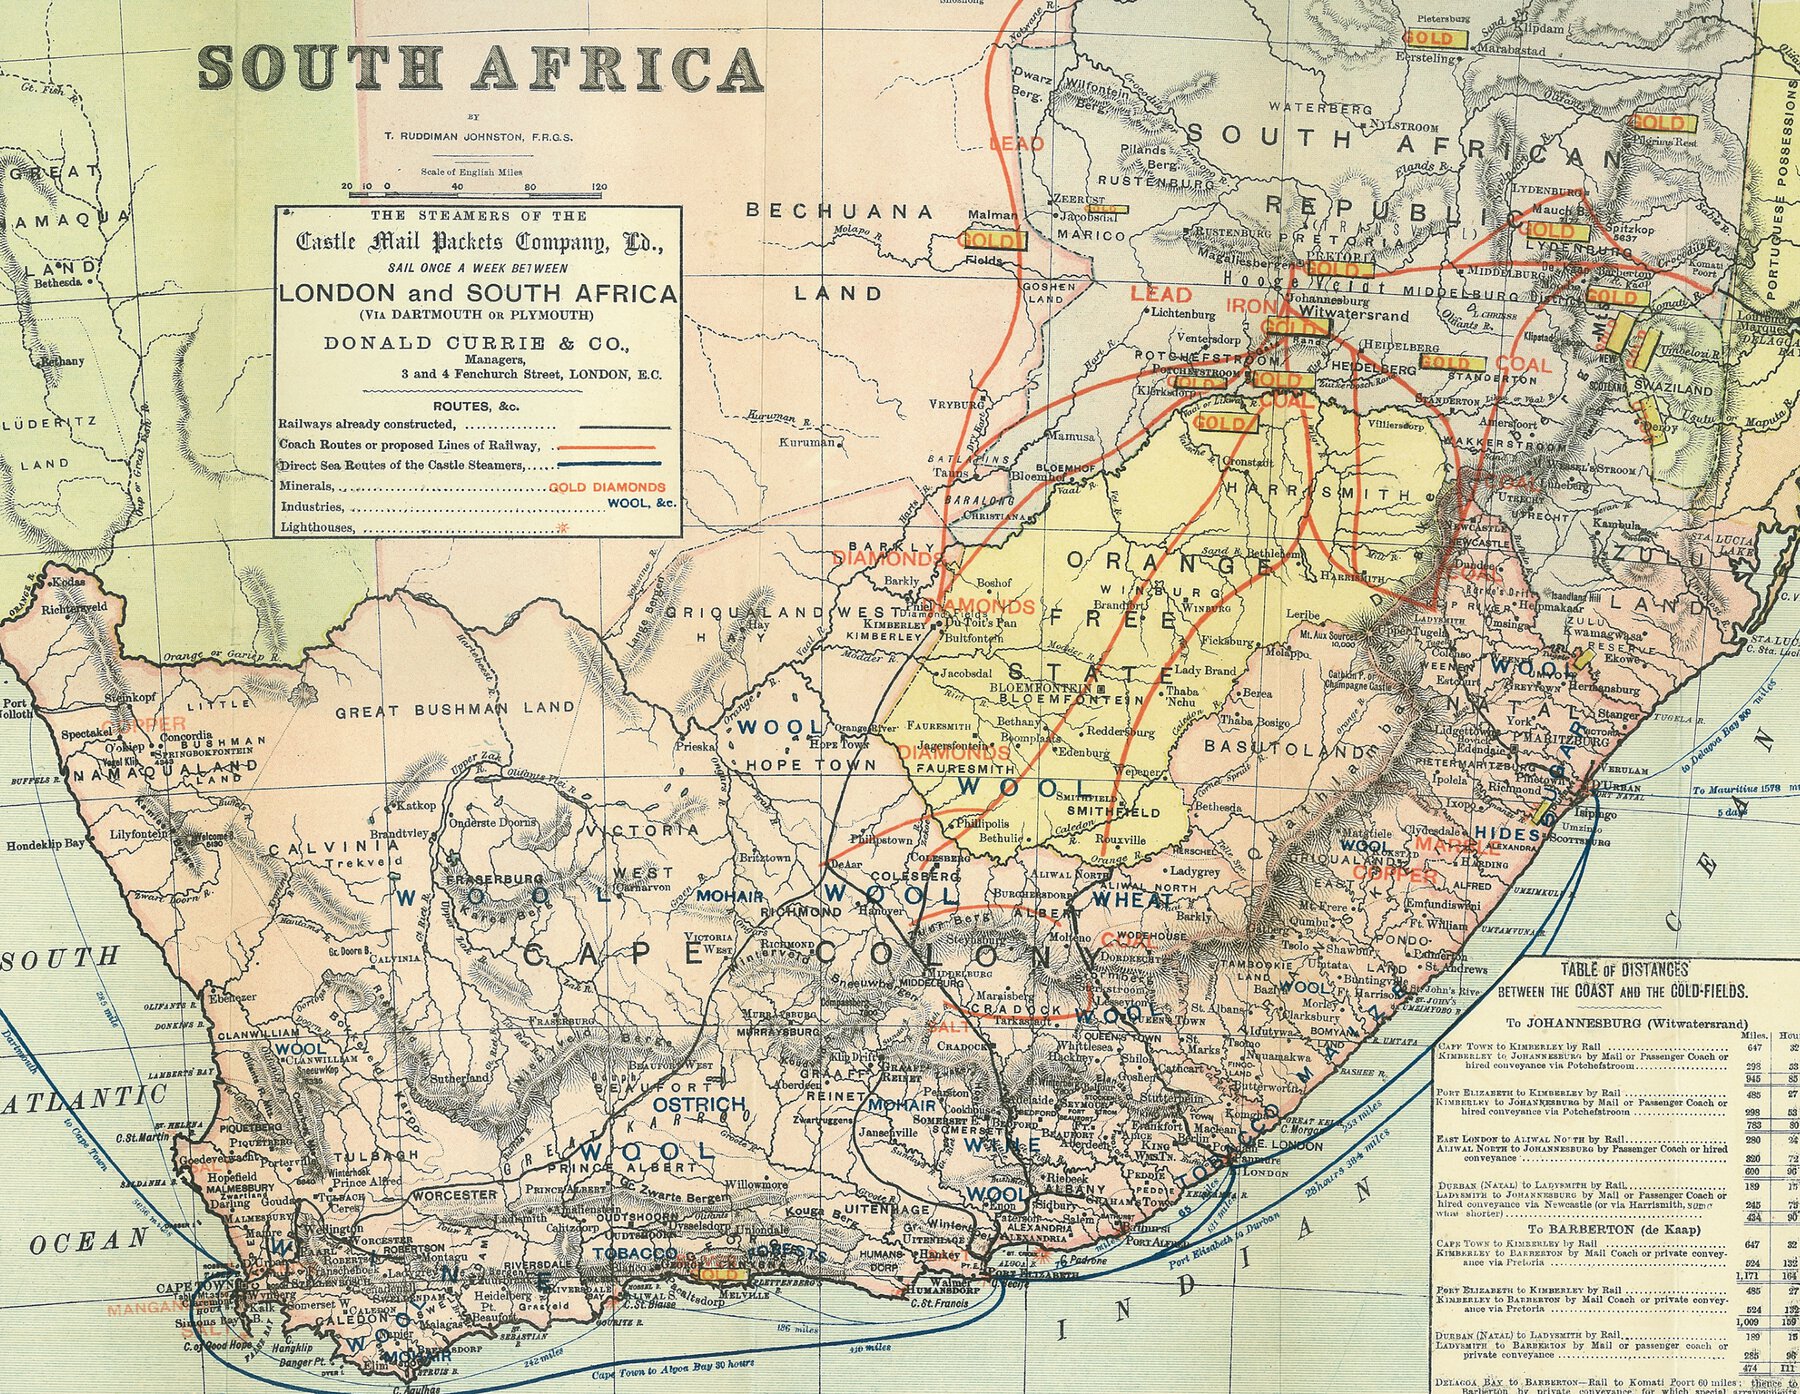 Printed color map of southern Africa with red lines showing routes of travel.